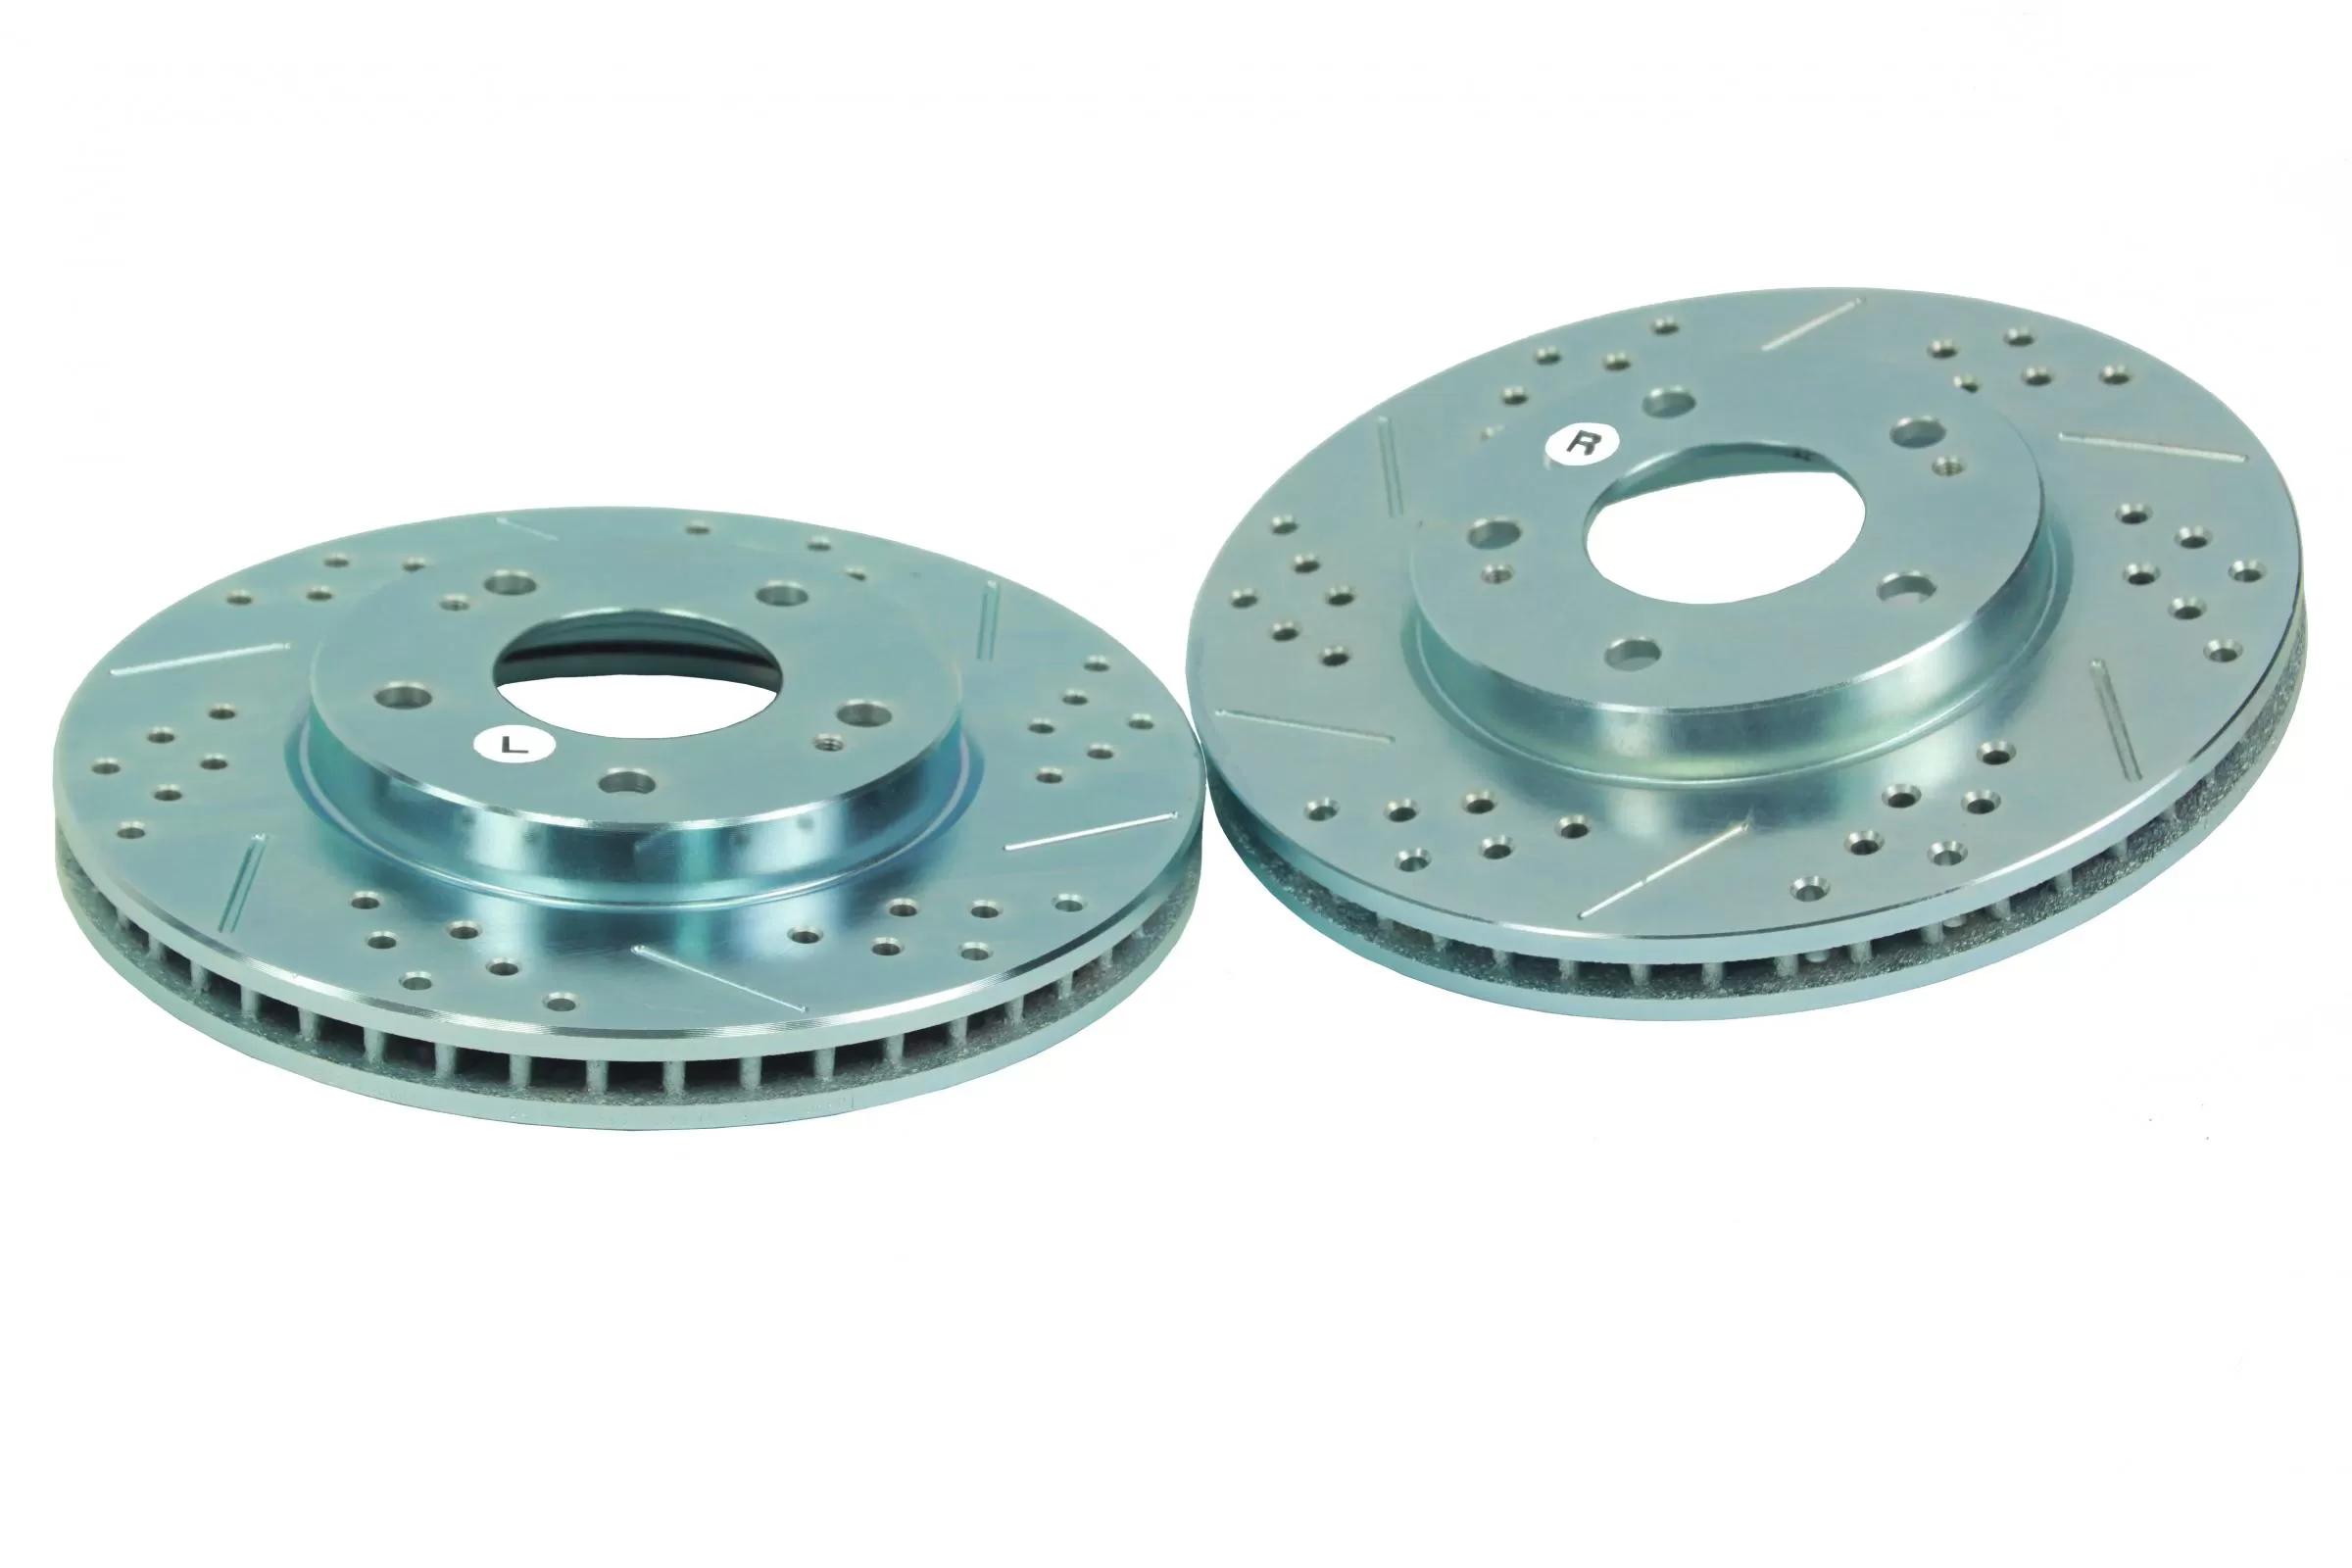 Baer Brakes Brake Rotor 10.50 Inch Front Various Chevrolet and Pontiac Applications - 05551-020